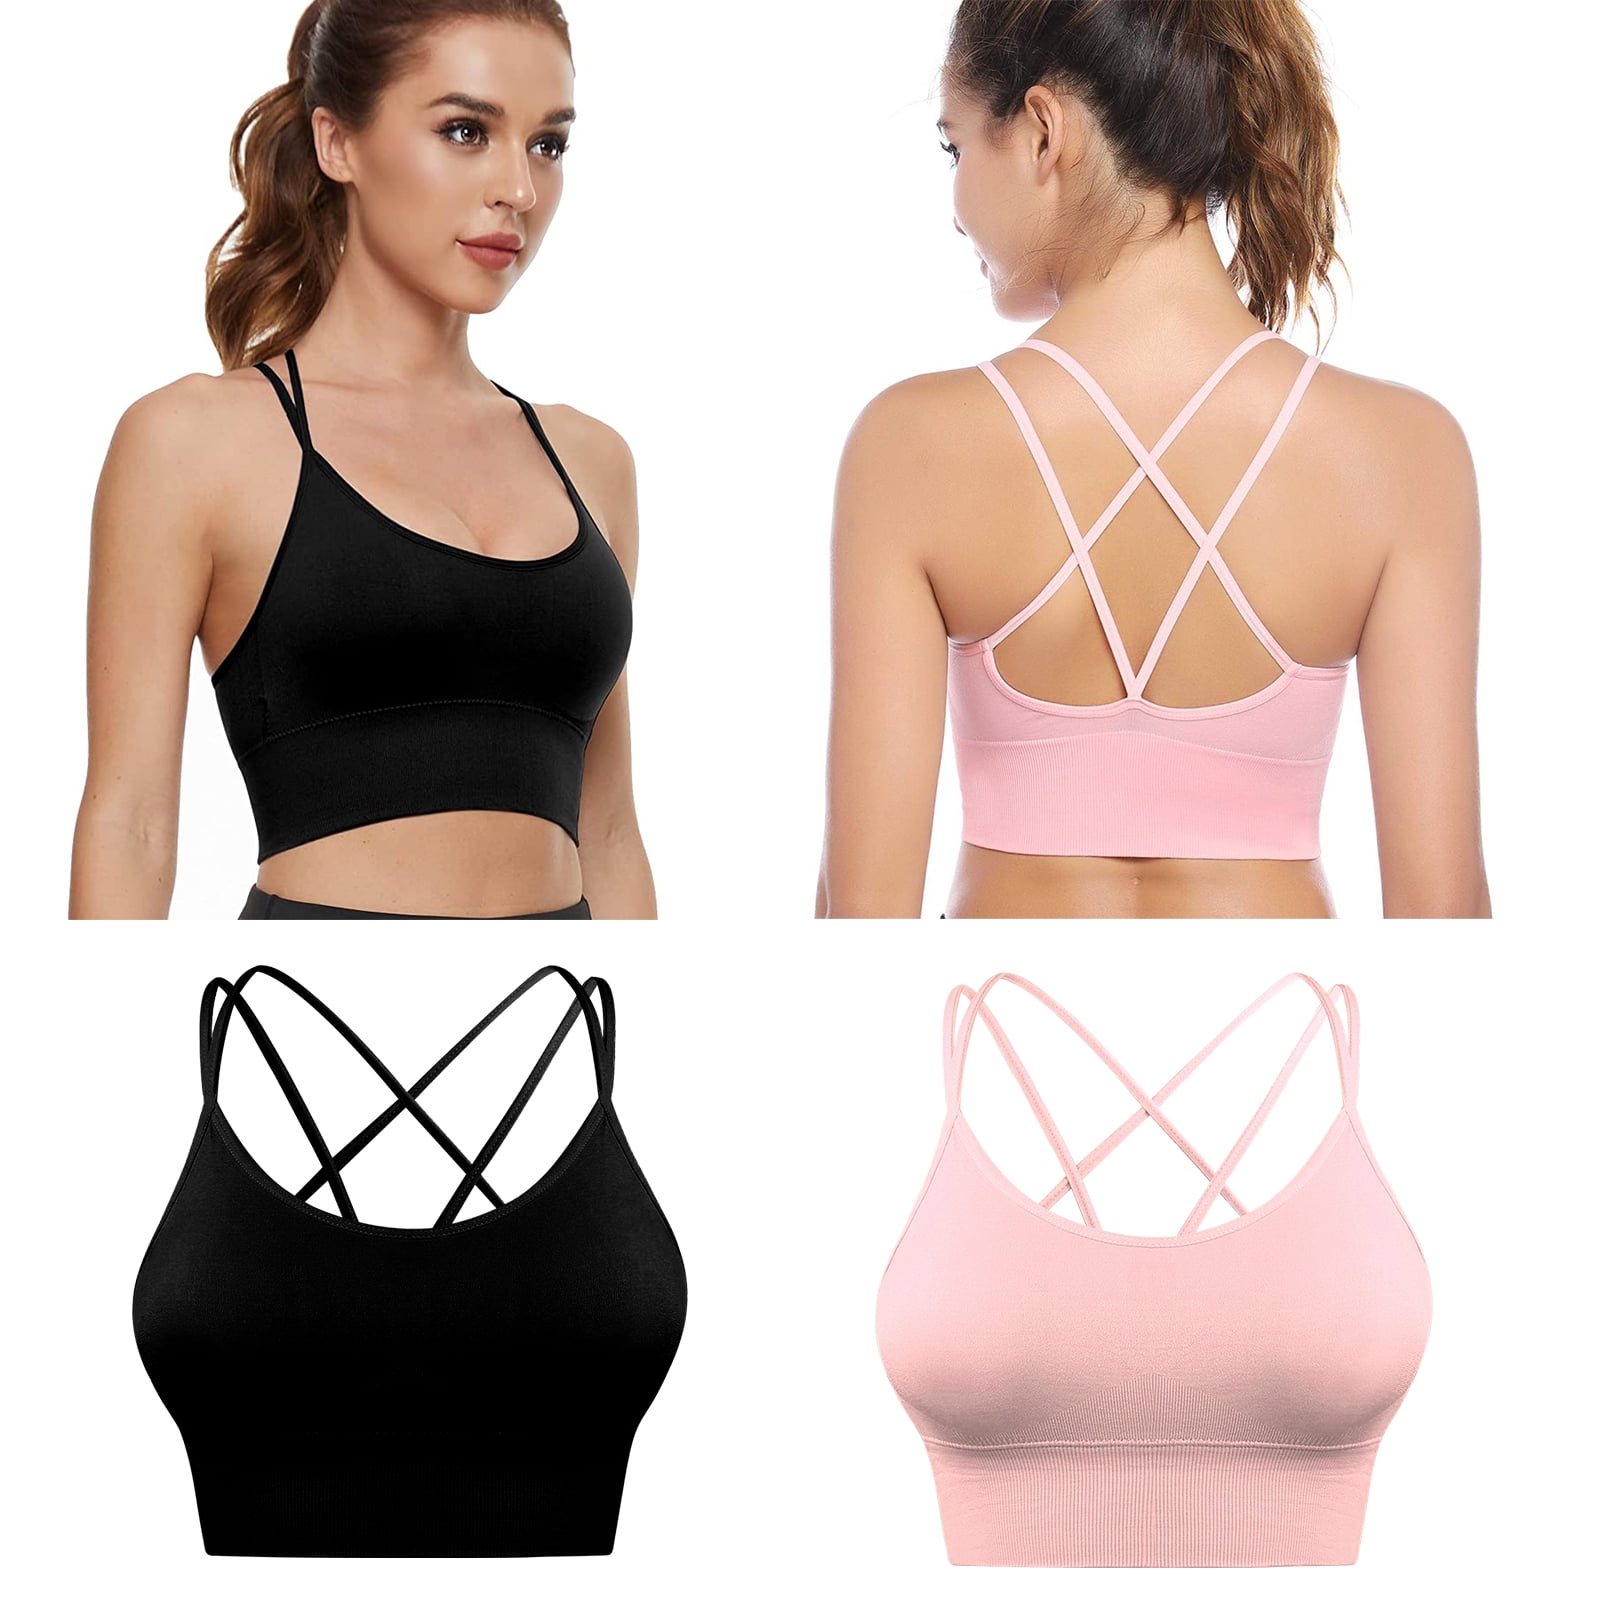 Strappy Sports Bra Sexy Bralettes For Women Criss Cross Bras Rave Top Black  Hot Pink 2 Pack M